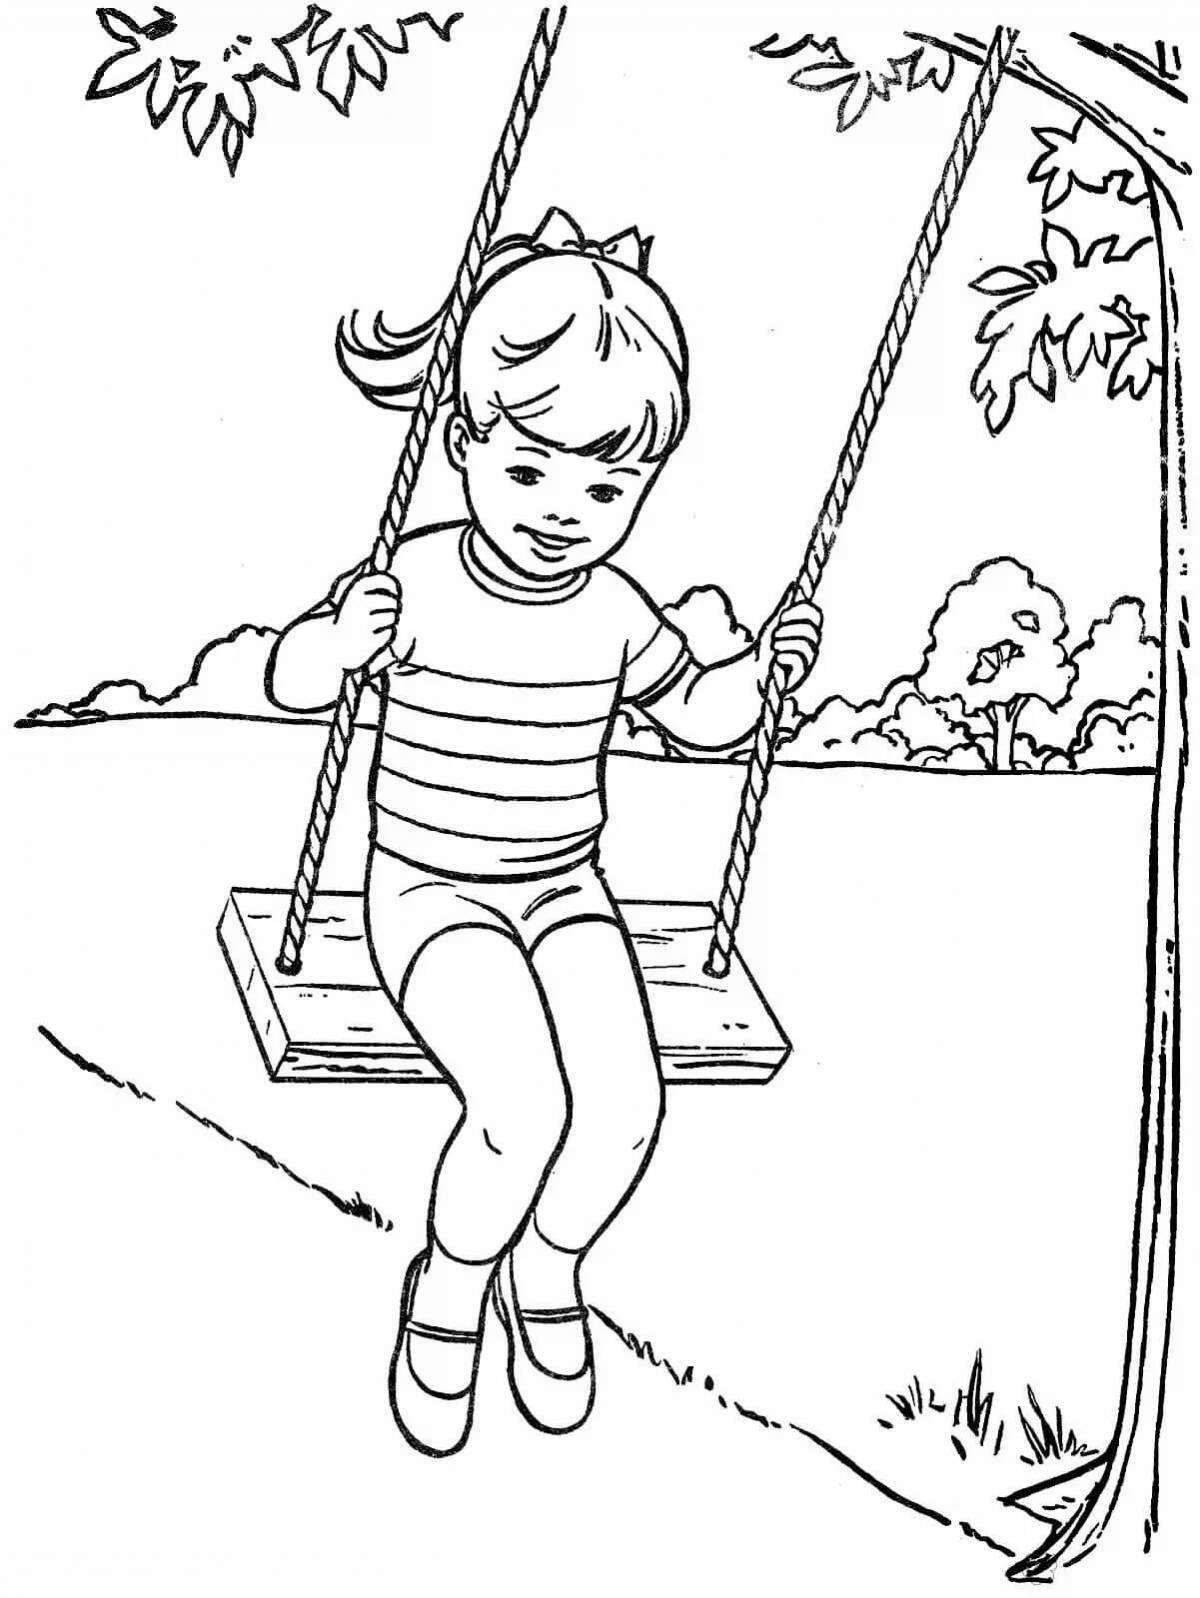 Coloring page charming girl on a swing